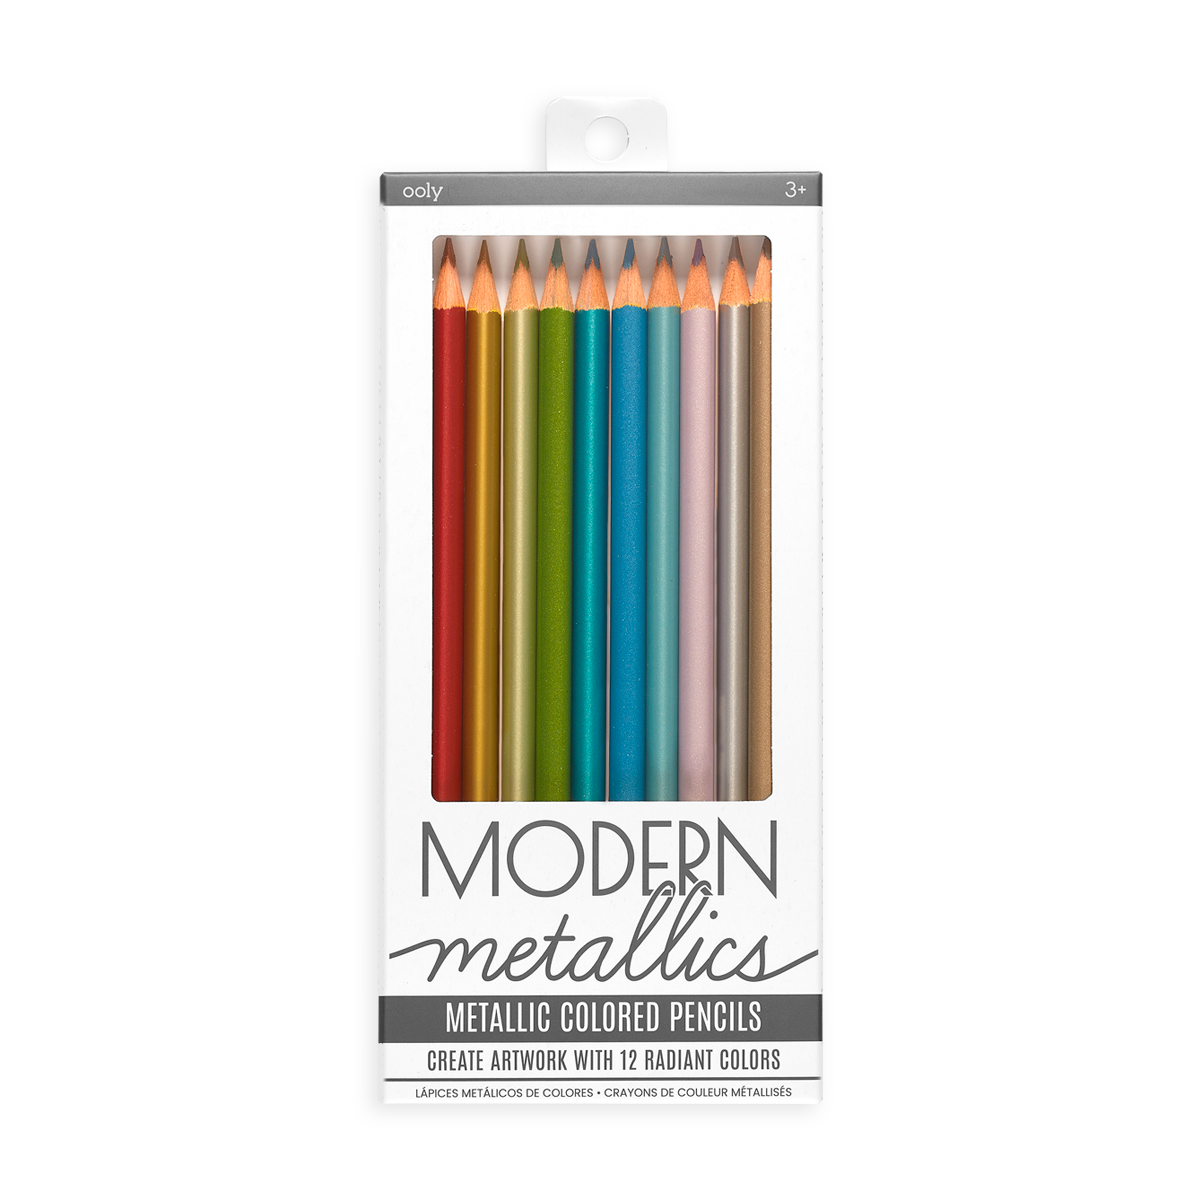 Modern Metallics Colored Pencils is a set of 12 metallic colored pencils